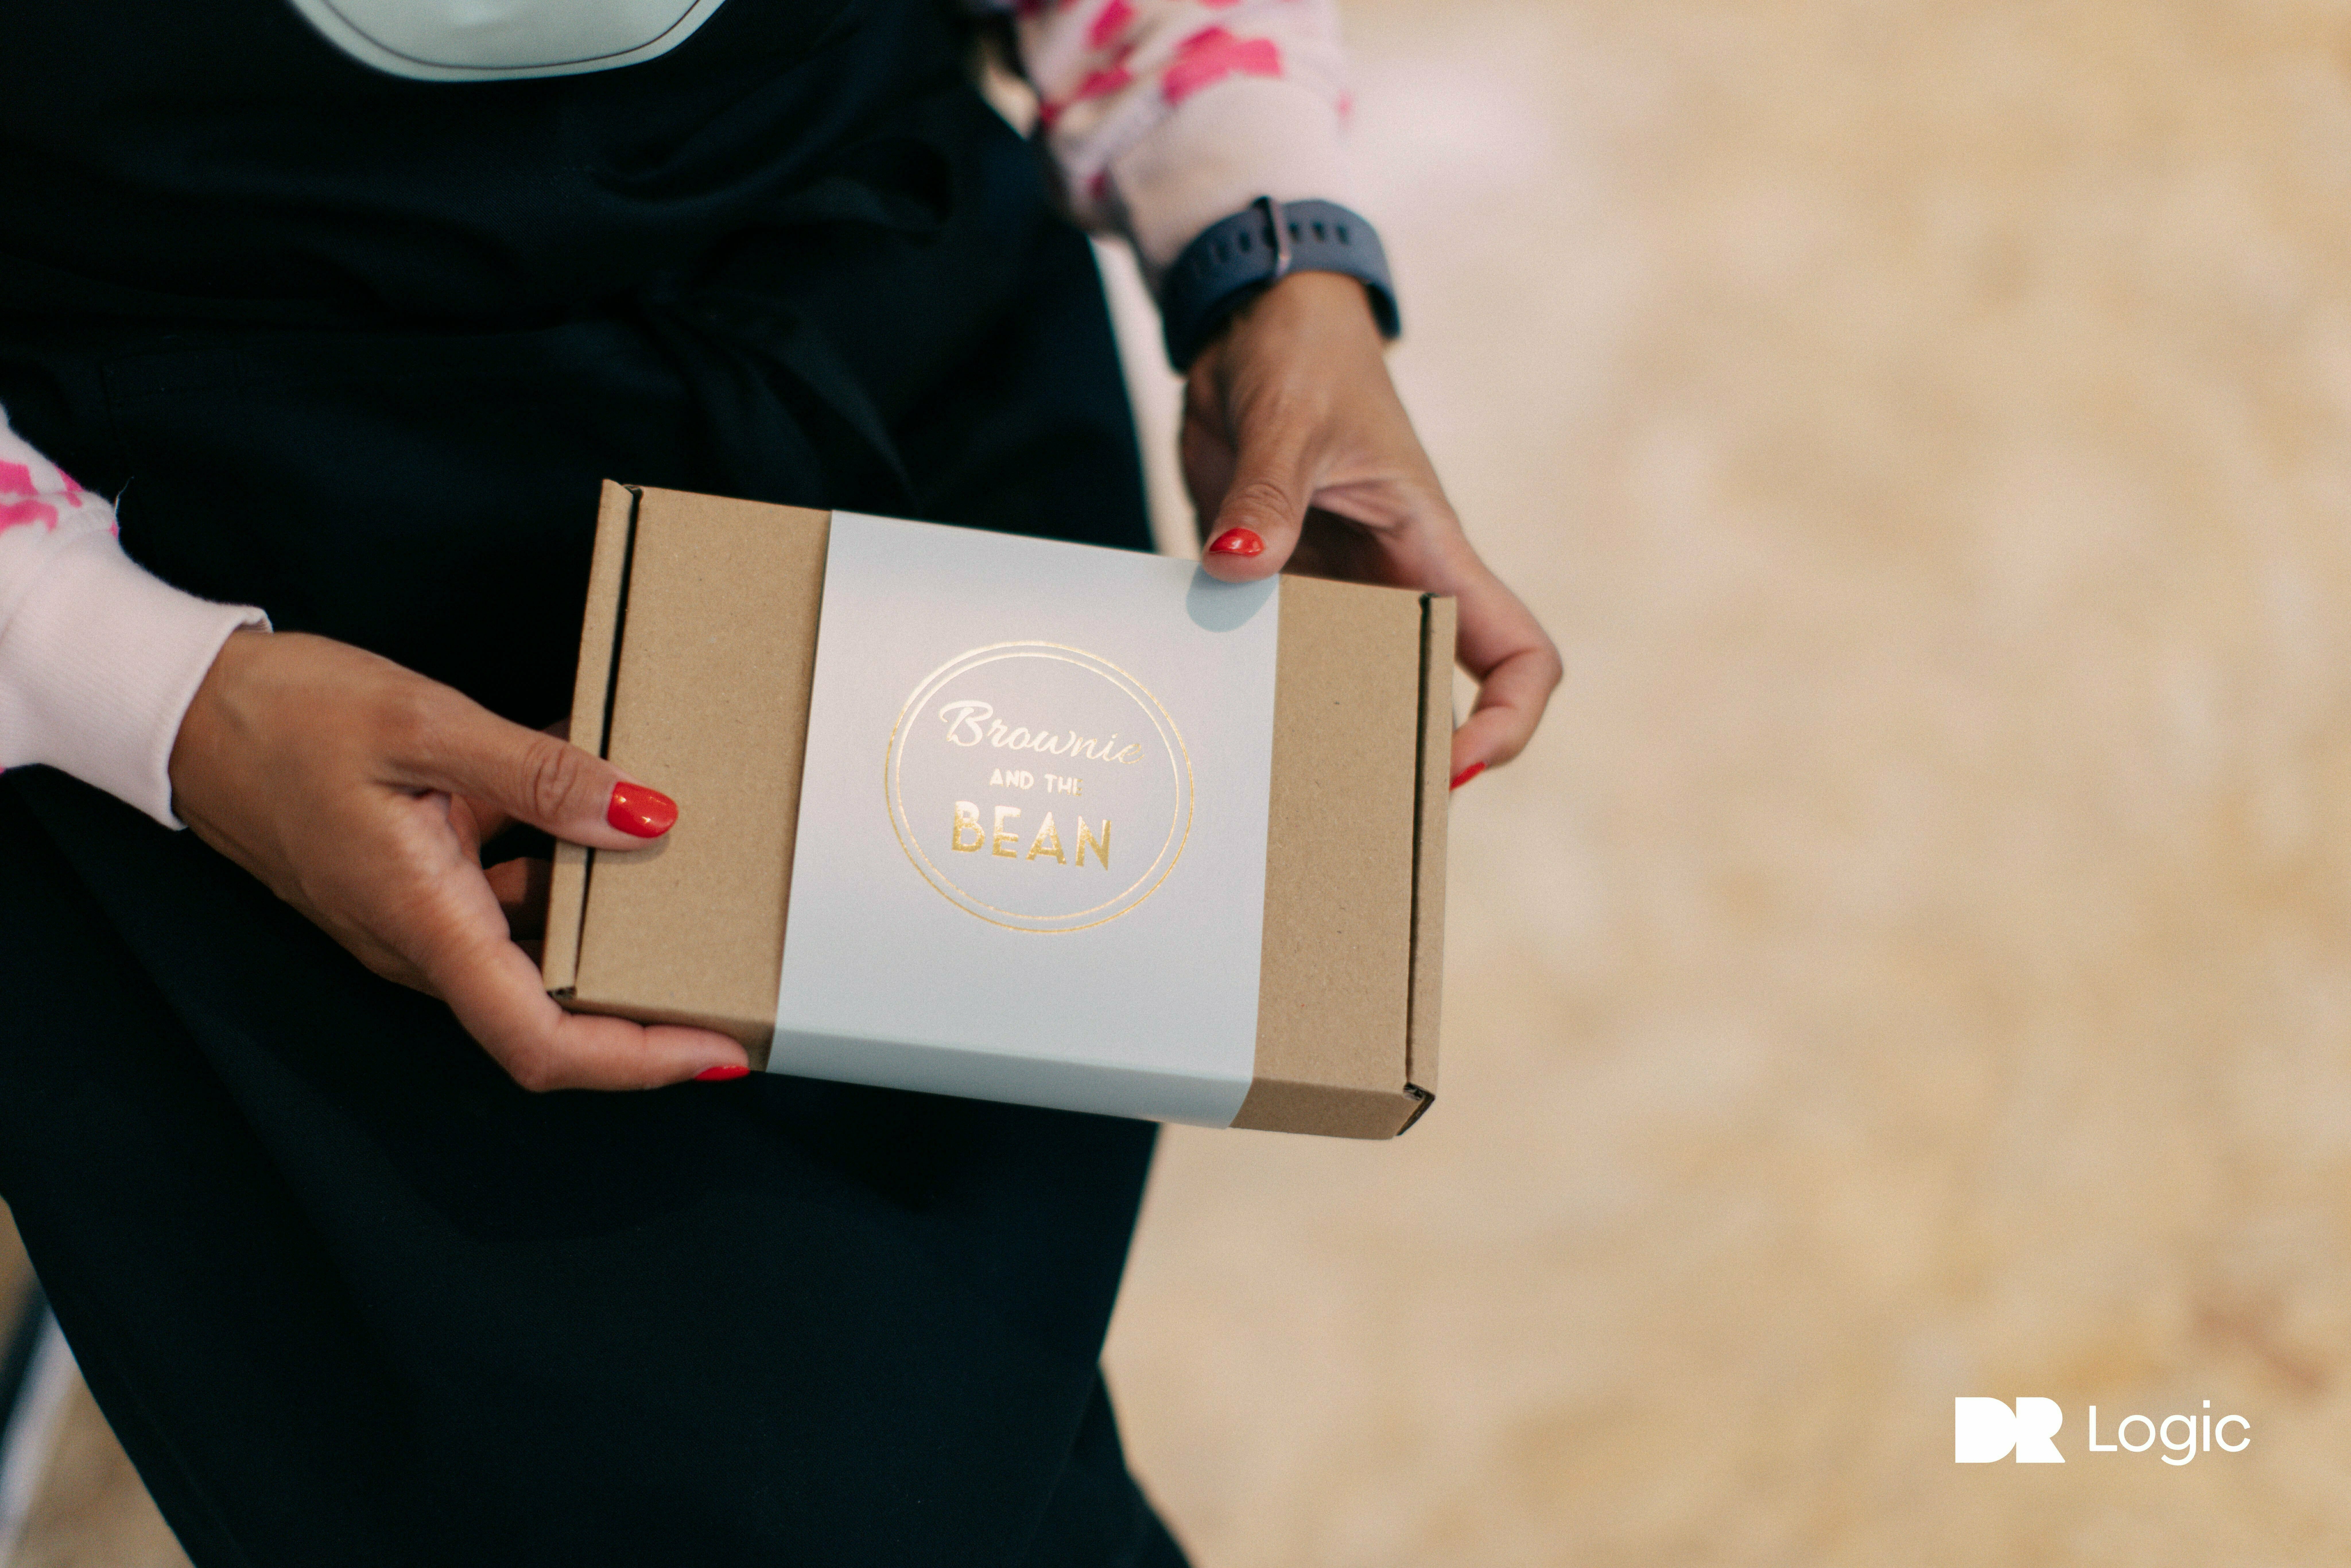 A woman is holding a brownie box in her hands